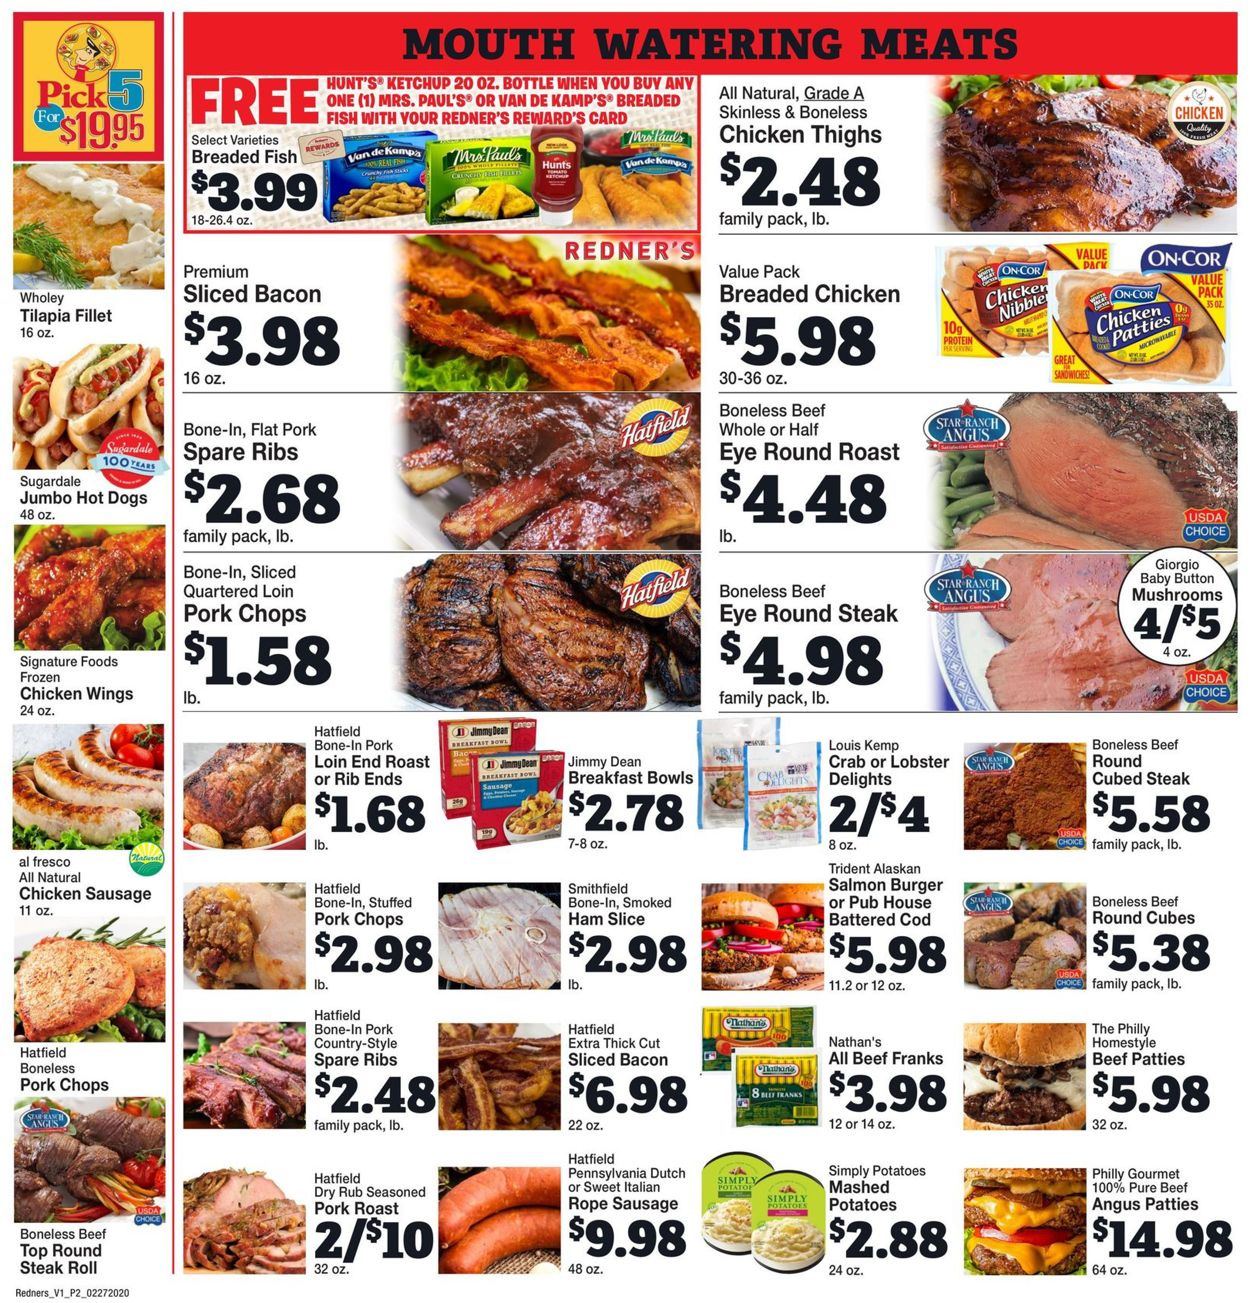 Catalogue Redner’s Warehouse Market from 02/27/2020